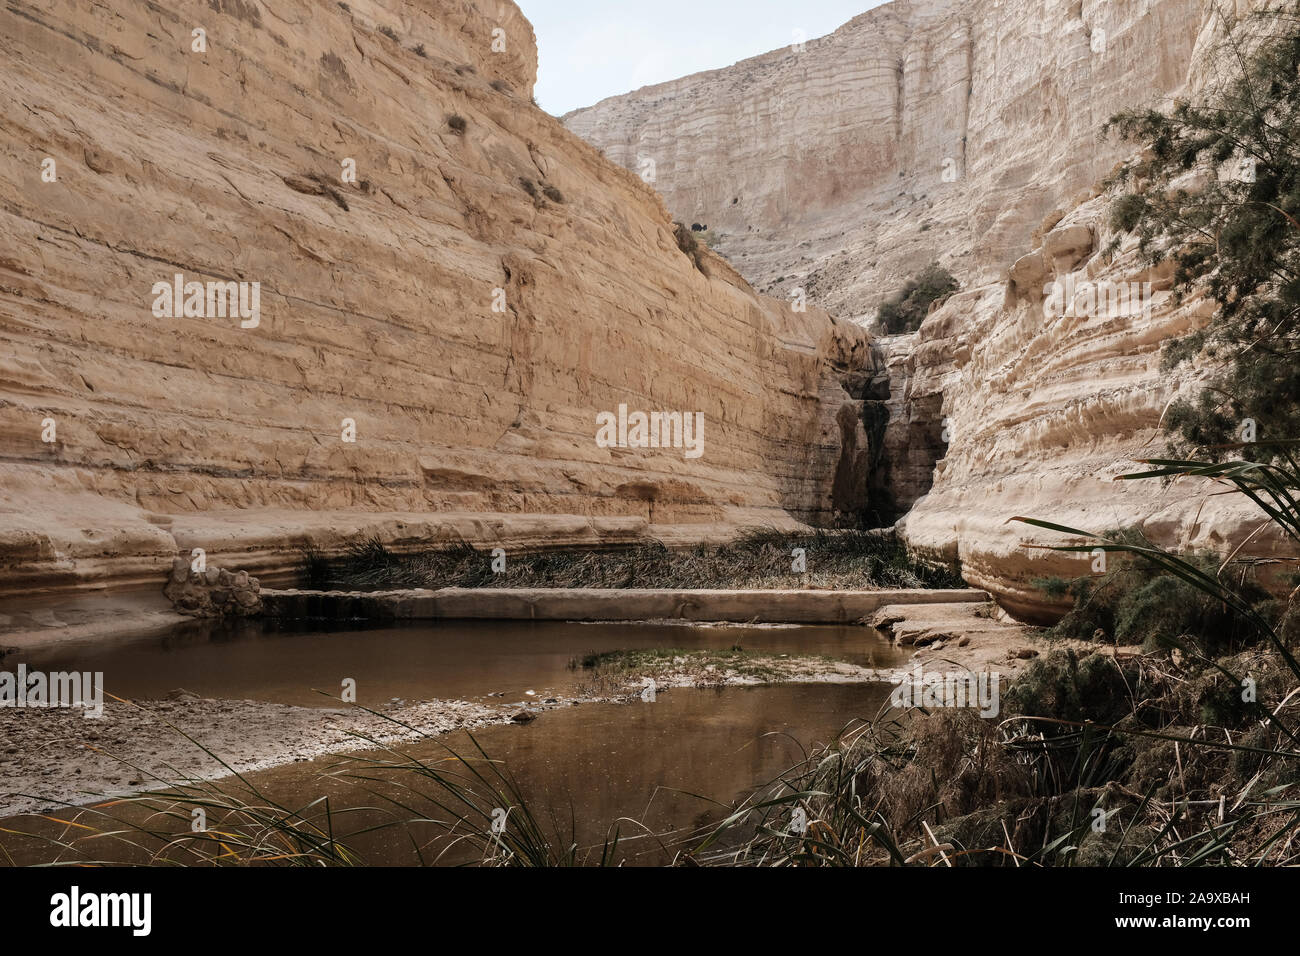 Ein Avdat National Park, Israel. 15th November, 2019. A natural waterfall and pool in the Tzin River at Ein Avdat National Park, a natural oasis in Israel's Negev Desert. Credit: Nir Alon/Alamy Live News. Stock Photo